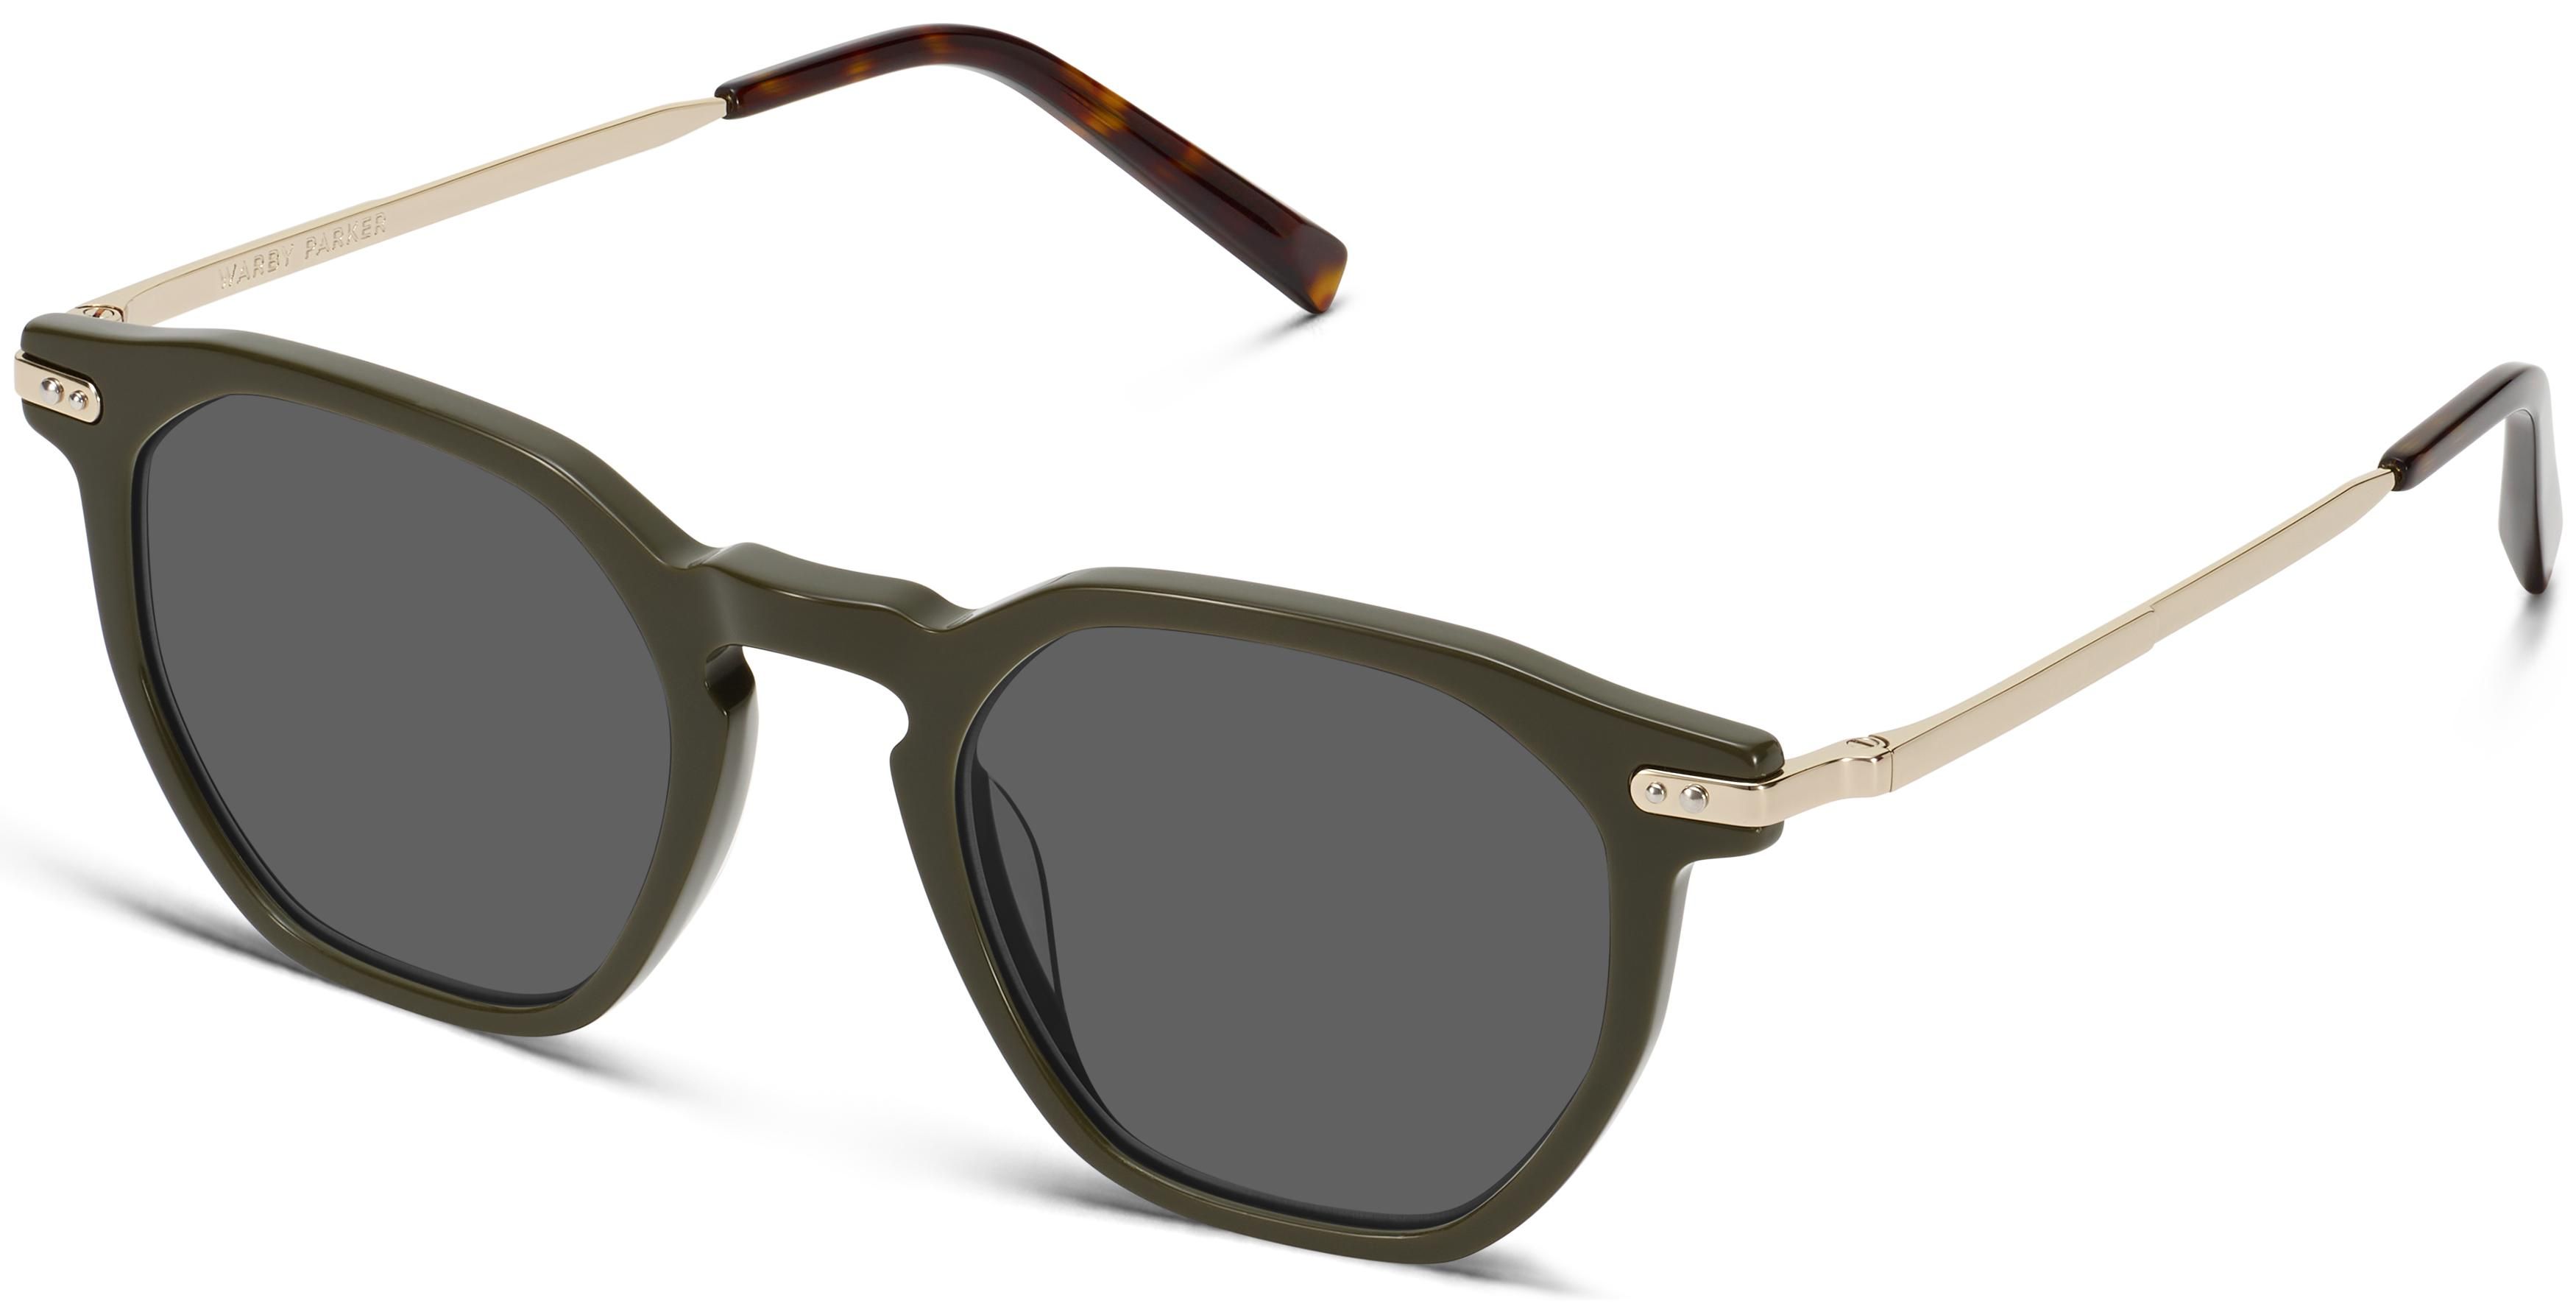 Rustin Sunglasses in Olive with Riesling | Warby Parker | Warby Parker (US)